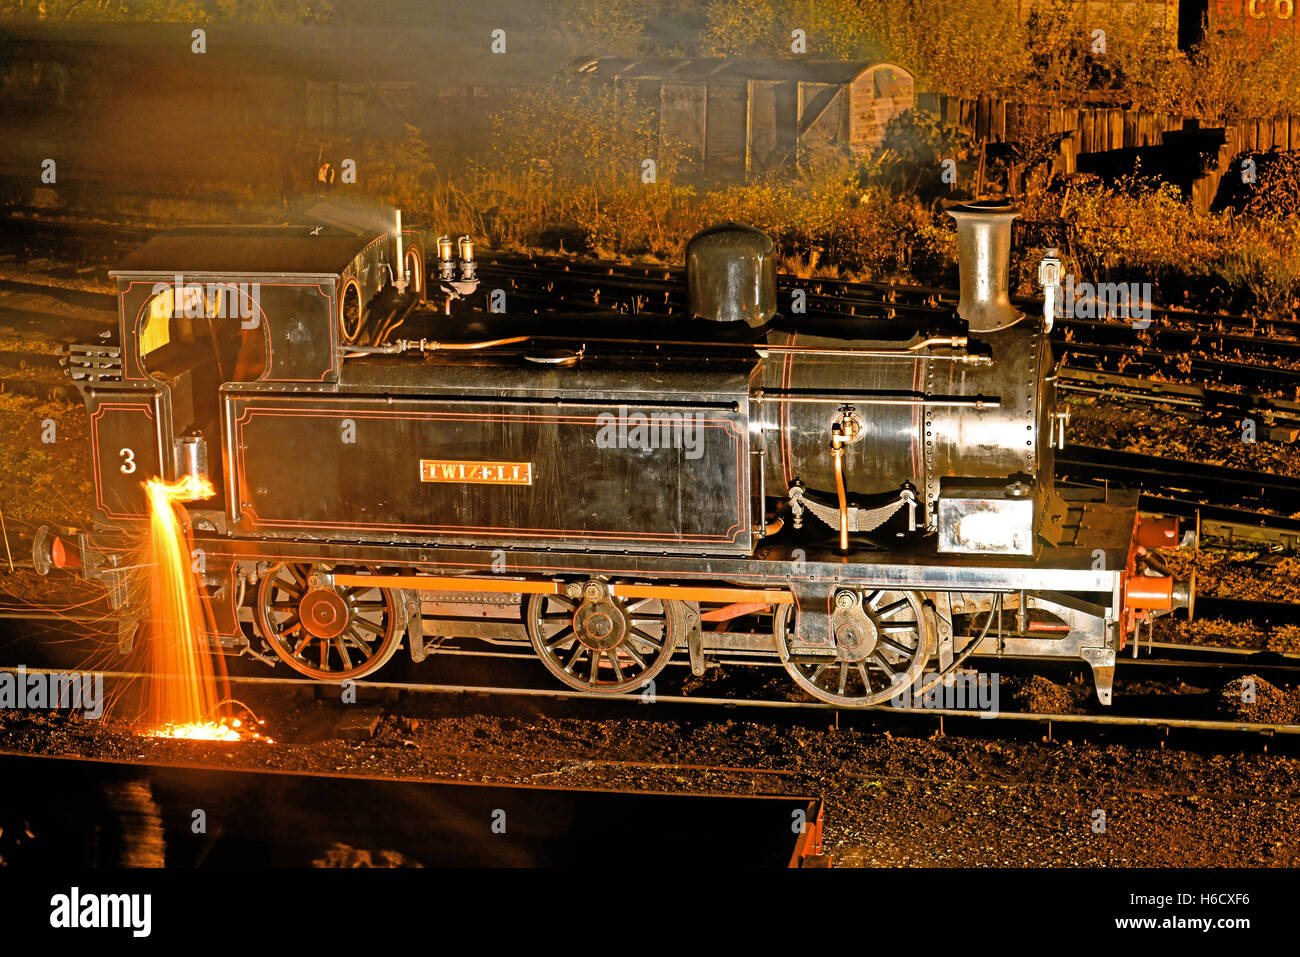 Twizell North Eastern night steam train damping down Stock Photo